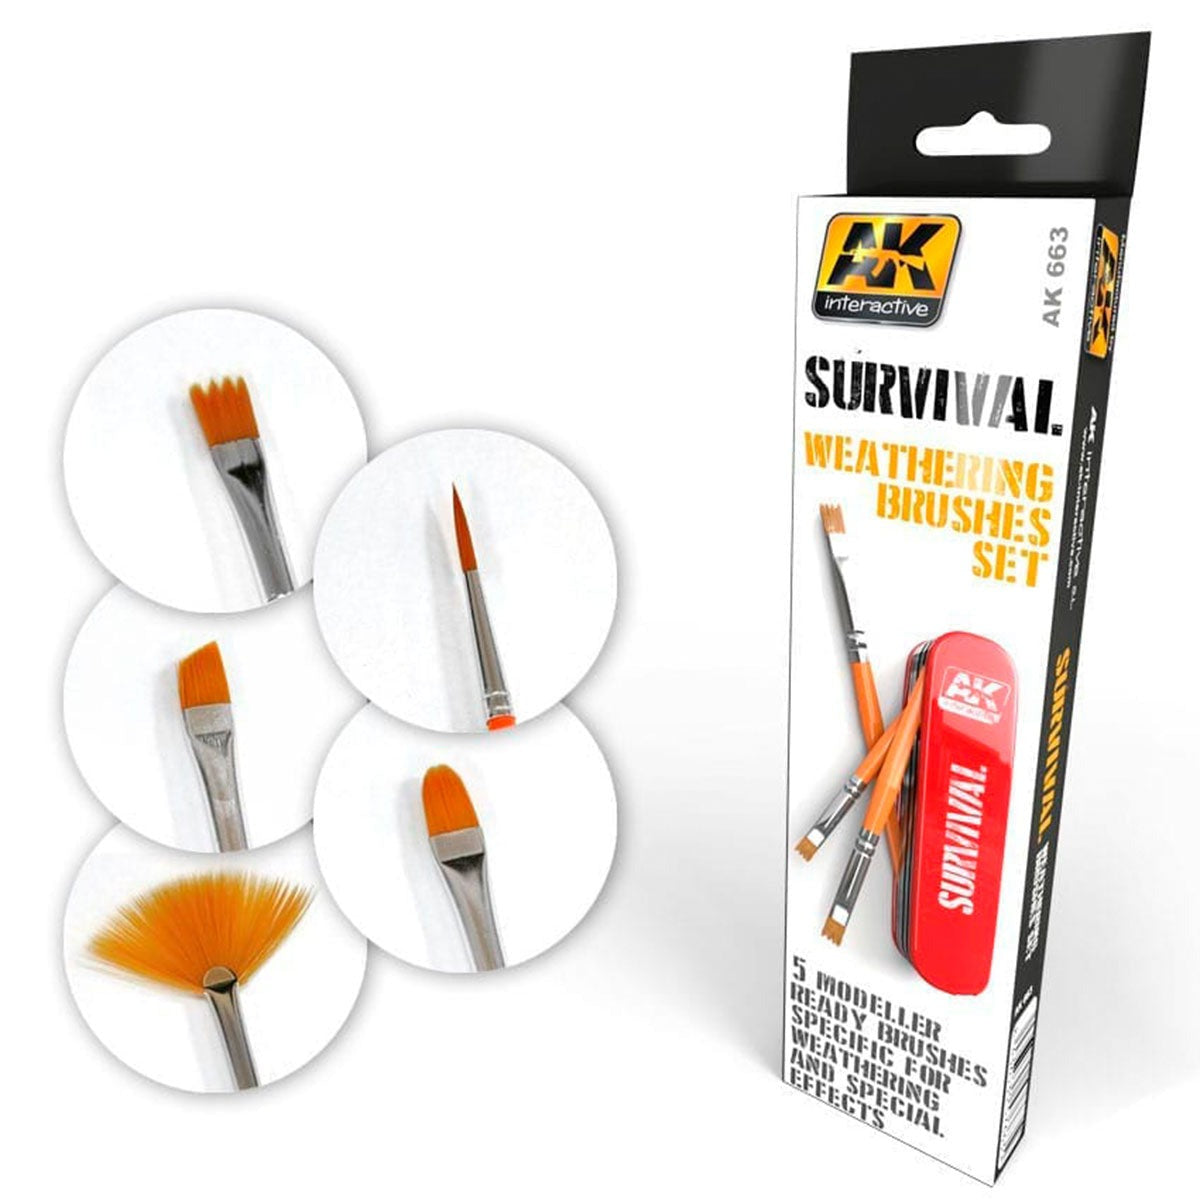 Survival Weathering Brushes Set - Loaded Dice